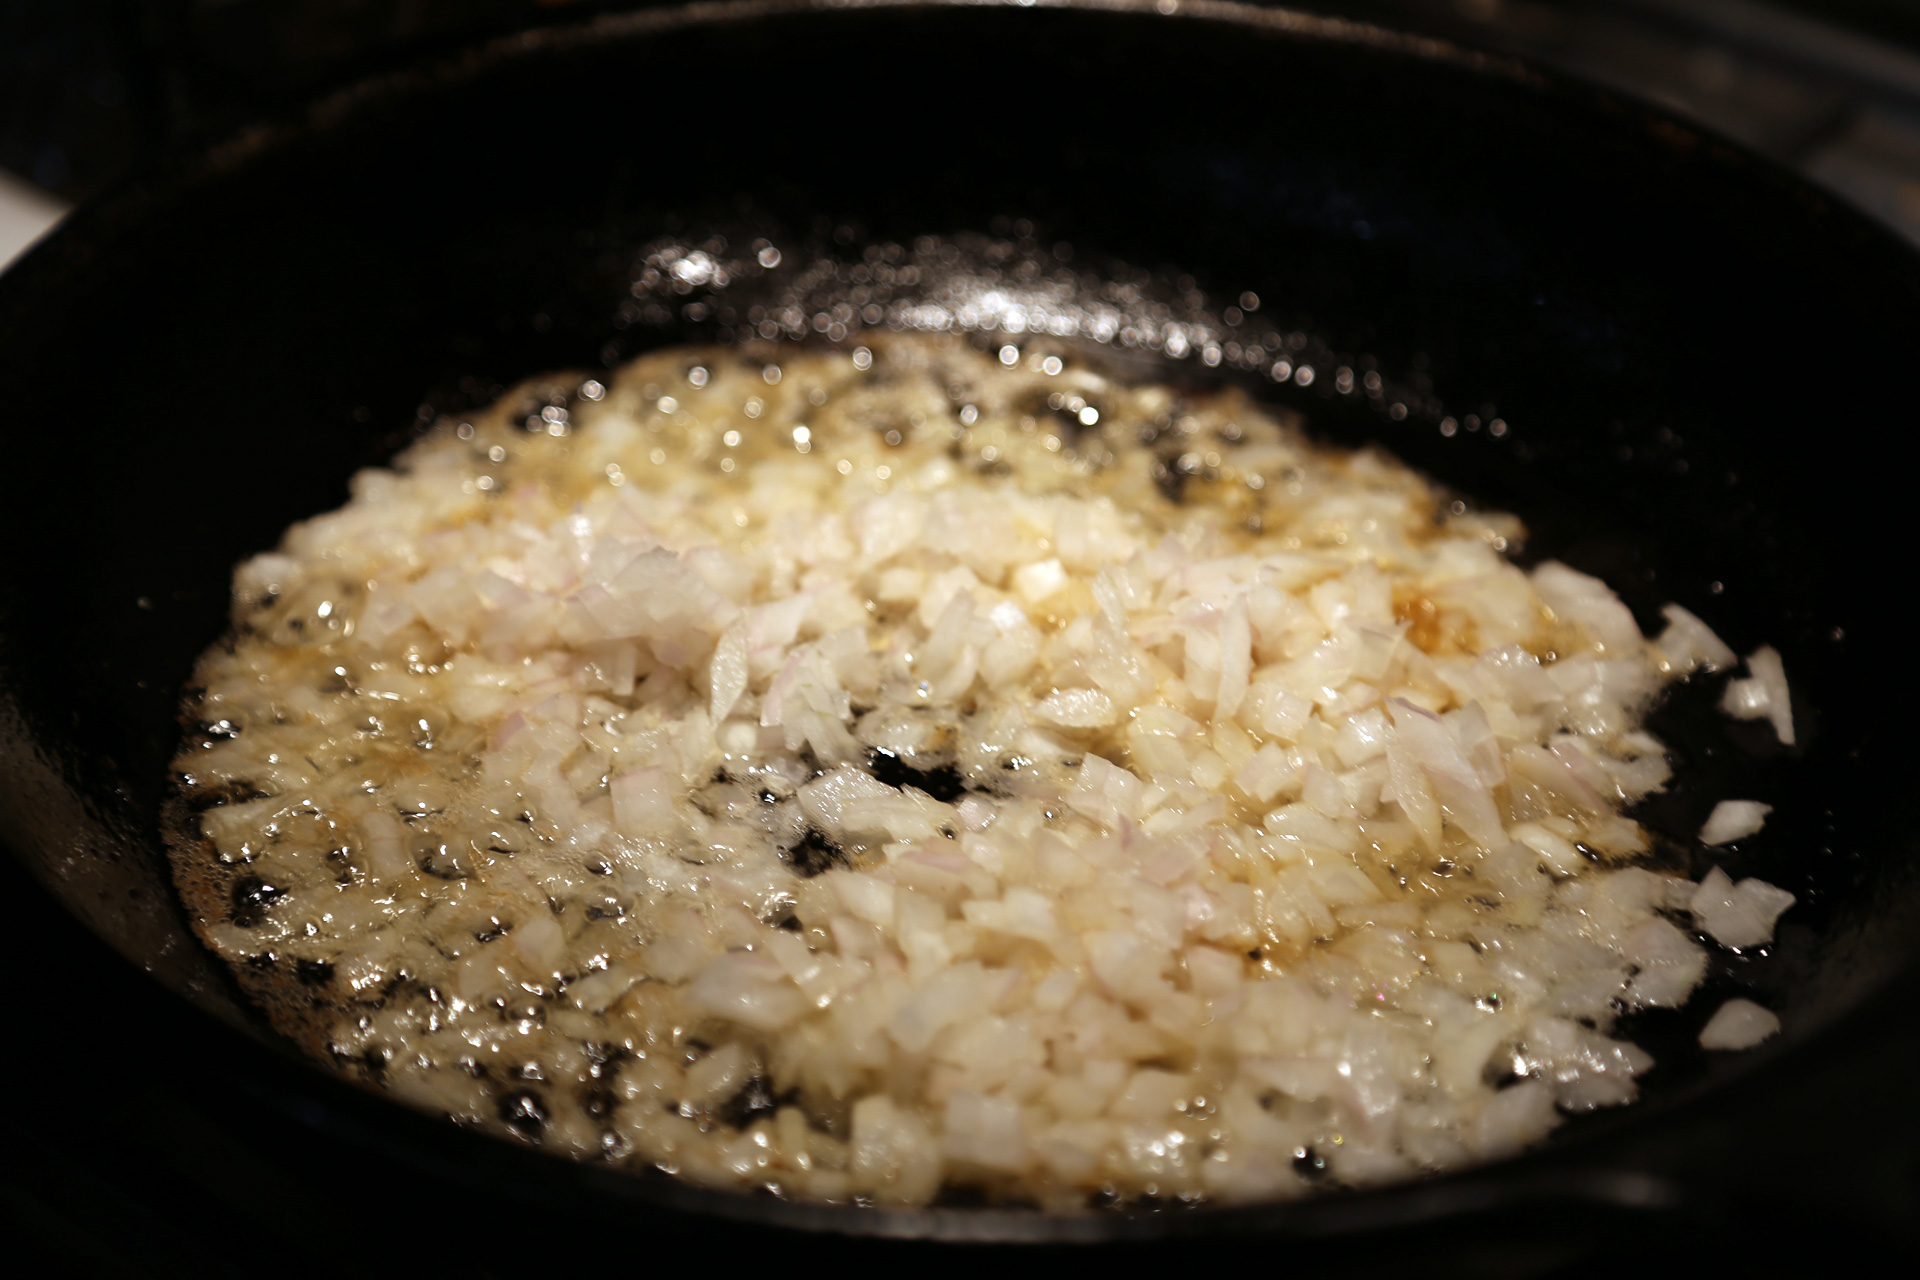 You should have about 3 tablespoons bacon fat in the pan. If not, add enough olive oil to make 3 tablespoons total (or pour off any excess). Heat the pan over medium heat. Add the onion